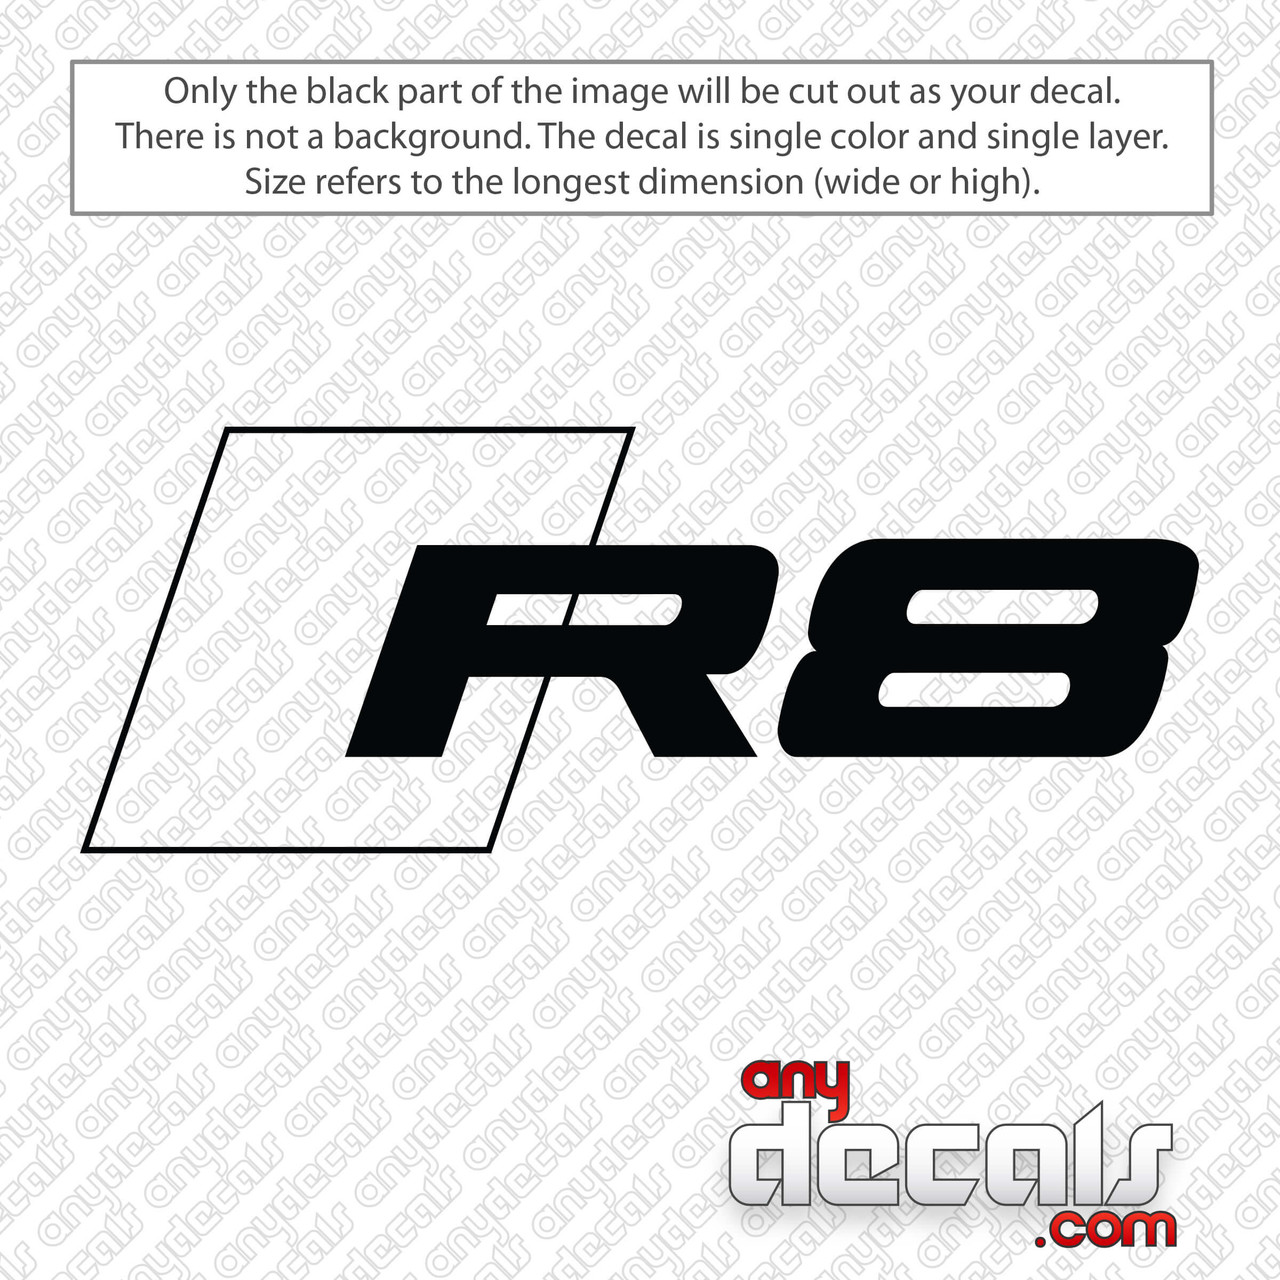 https://cdn11.bigcommerce.com/s-df97c/images/stencil/1280x1280/products/977/1979/audi-r8-logo-decal-sticker__10670.1593931643.jpg?c=2?imbypass=on